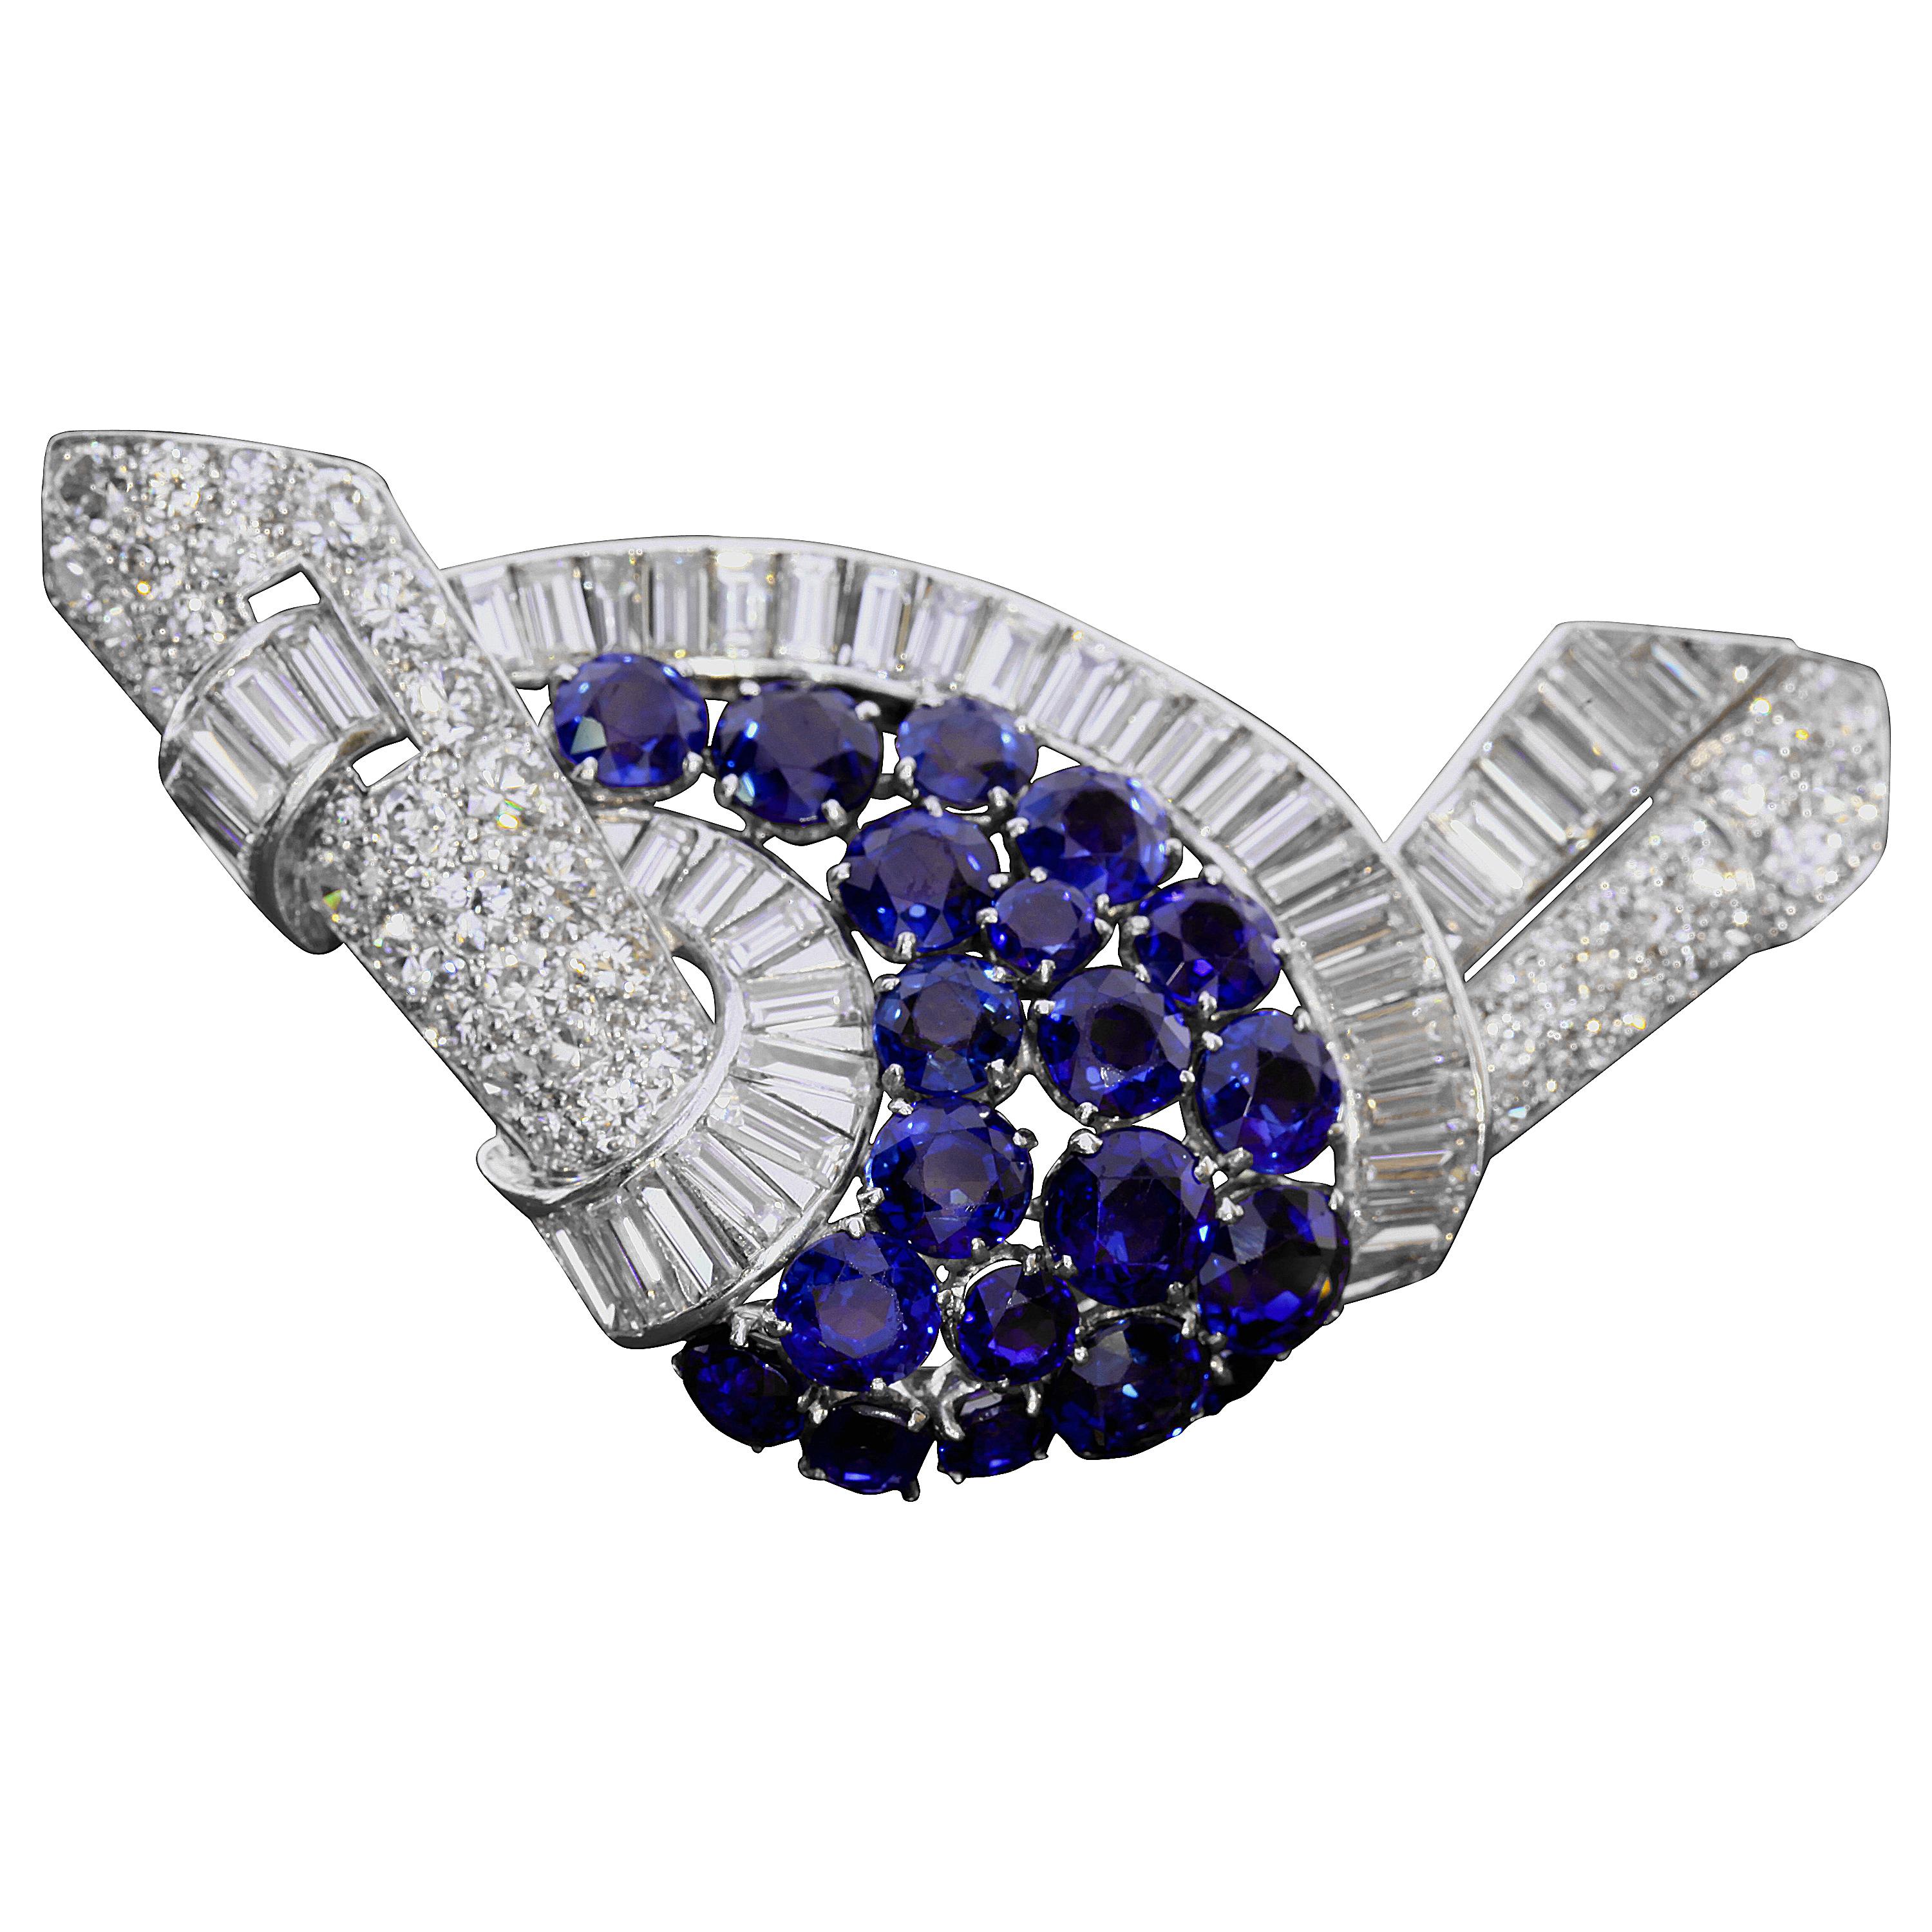 Art Deco Platinum Brooch with Diamonds and Sapphires from circa 1935 im Angebot